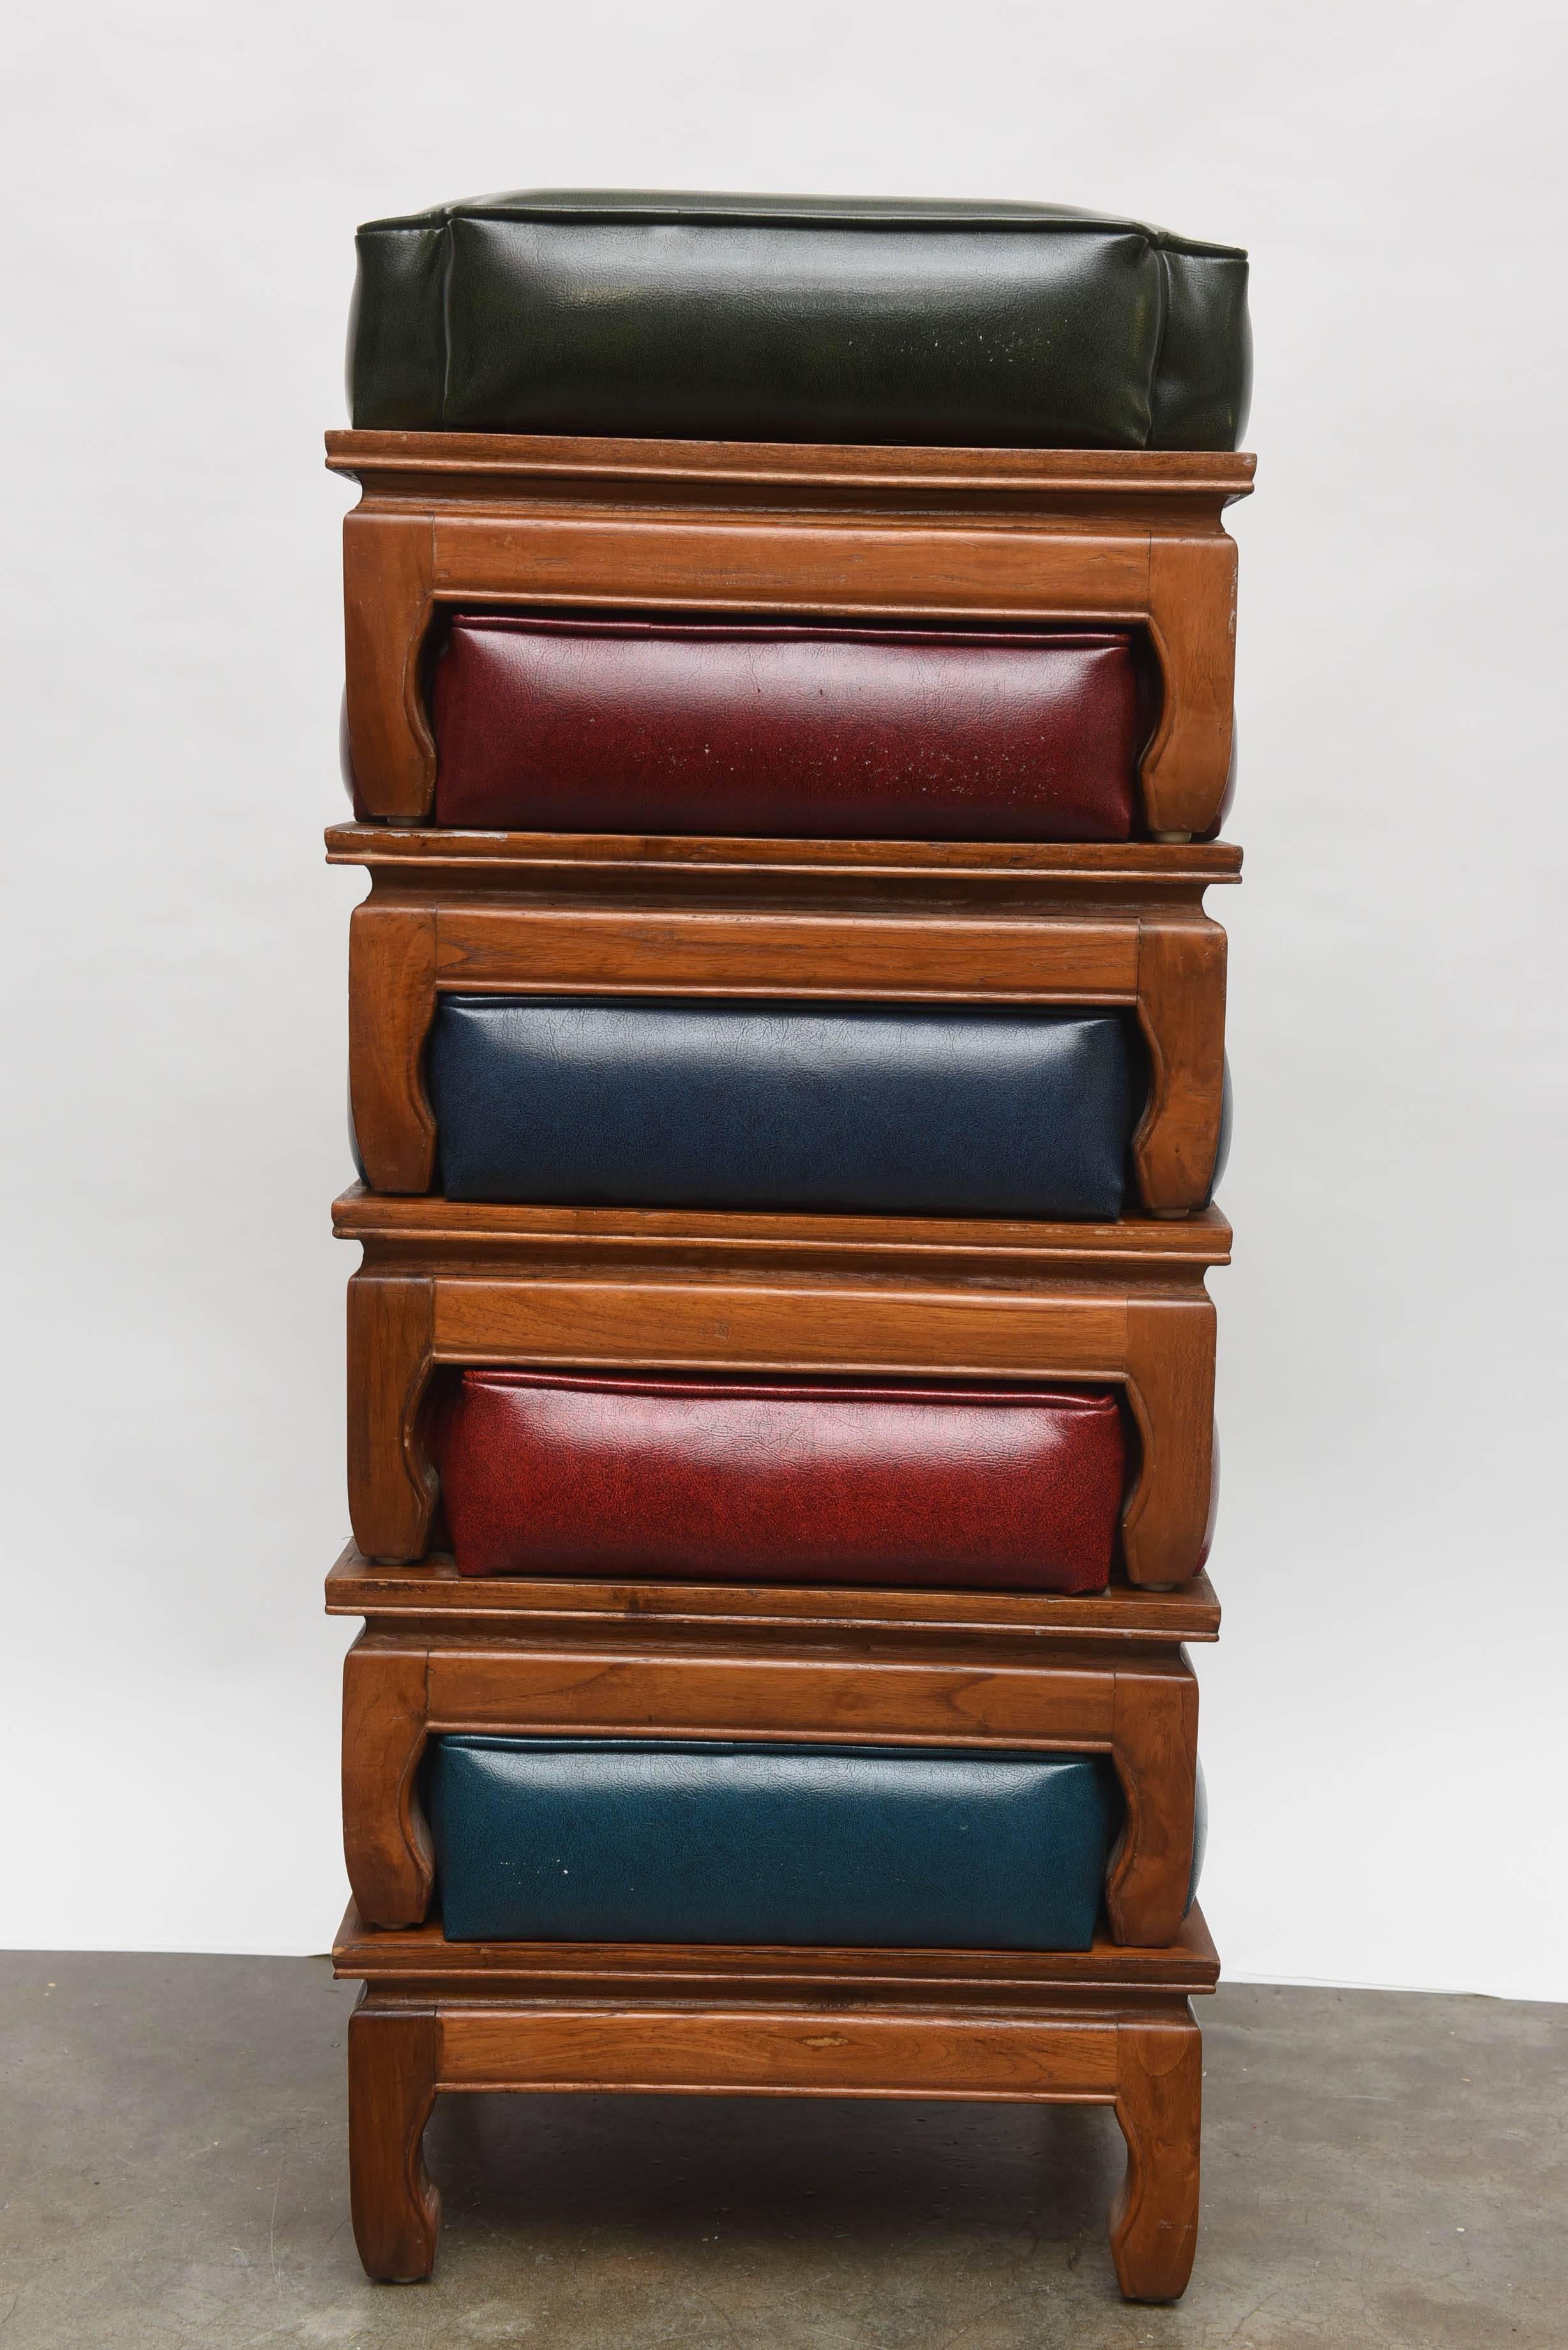 Unusual and practical set of five stools/ottomans that stack on top of each other. In alternating naugahyde colors of red, blue and green with wood bases. Each individual ottoman is 11